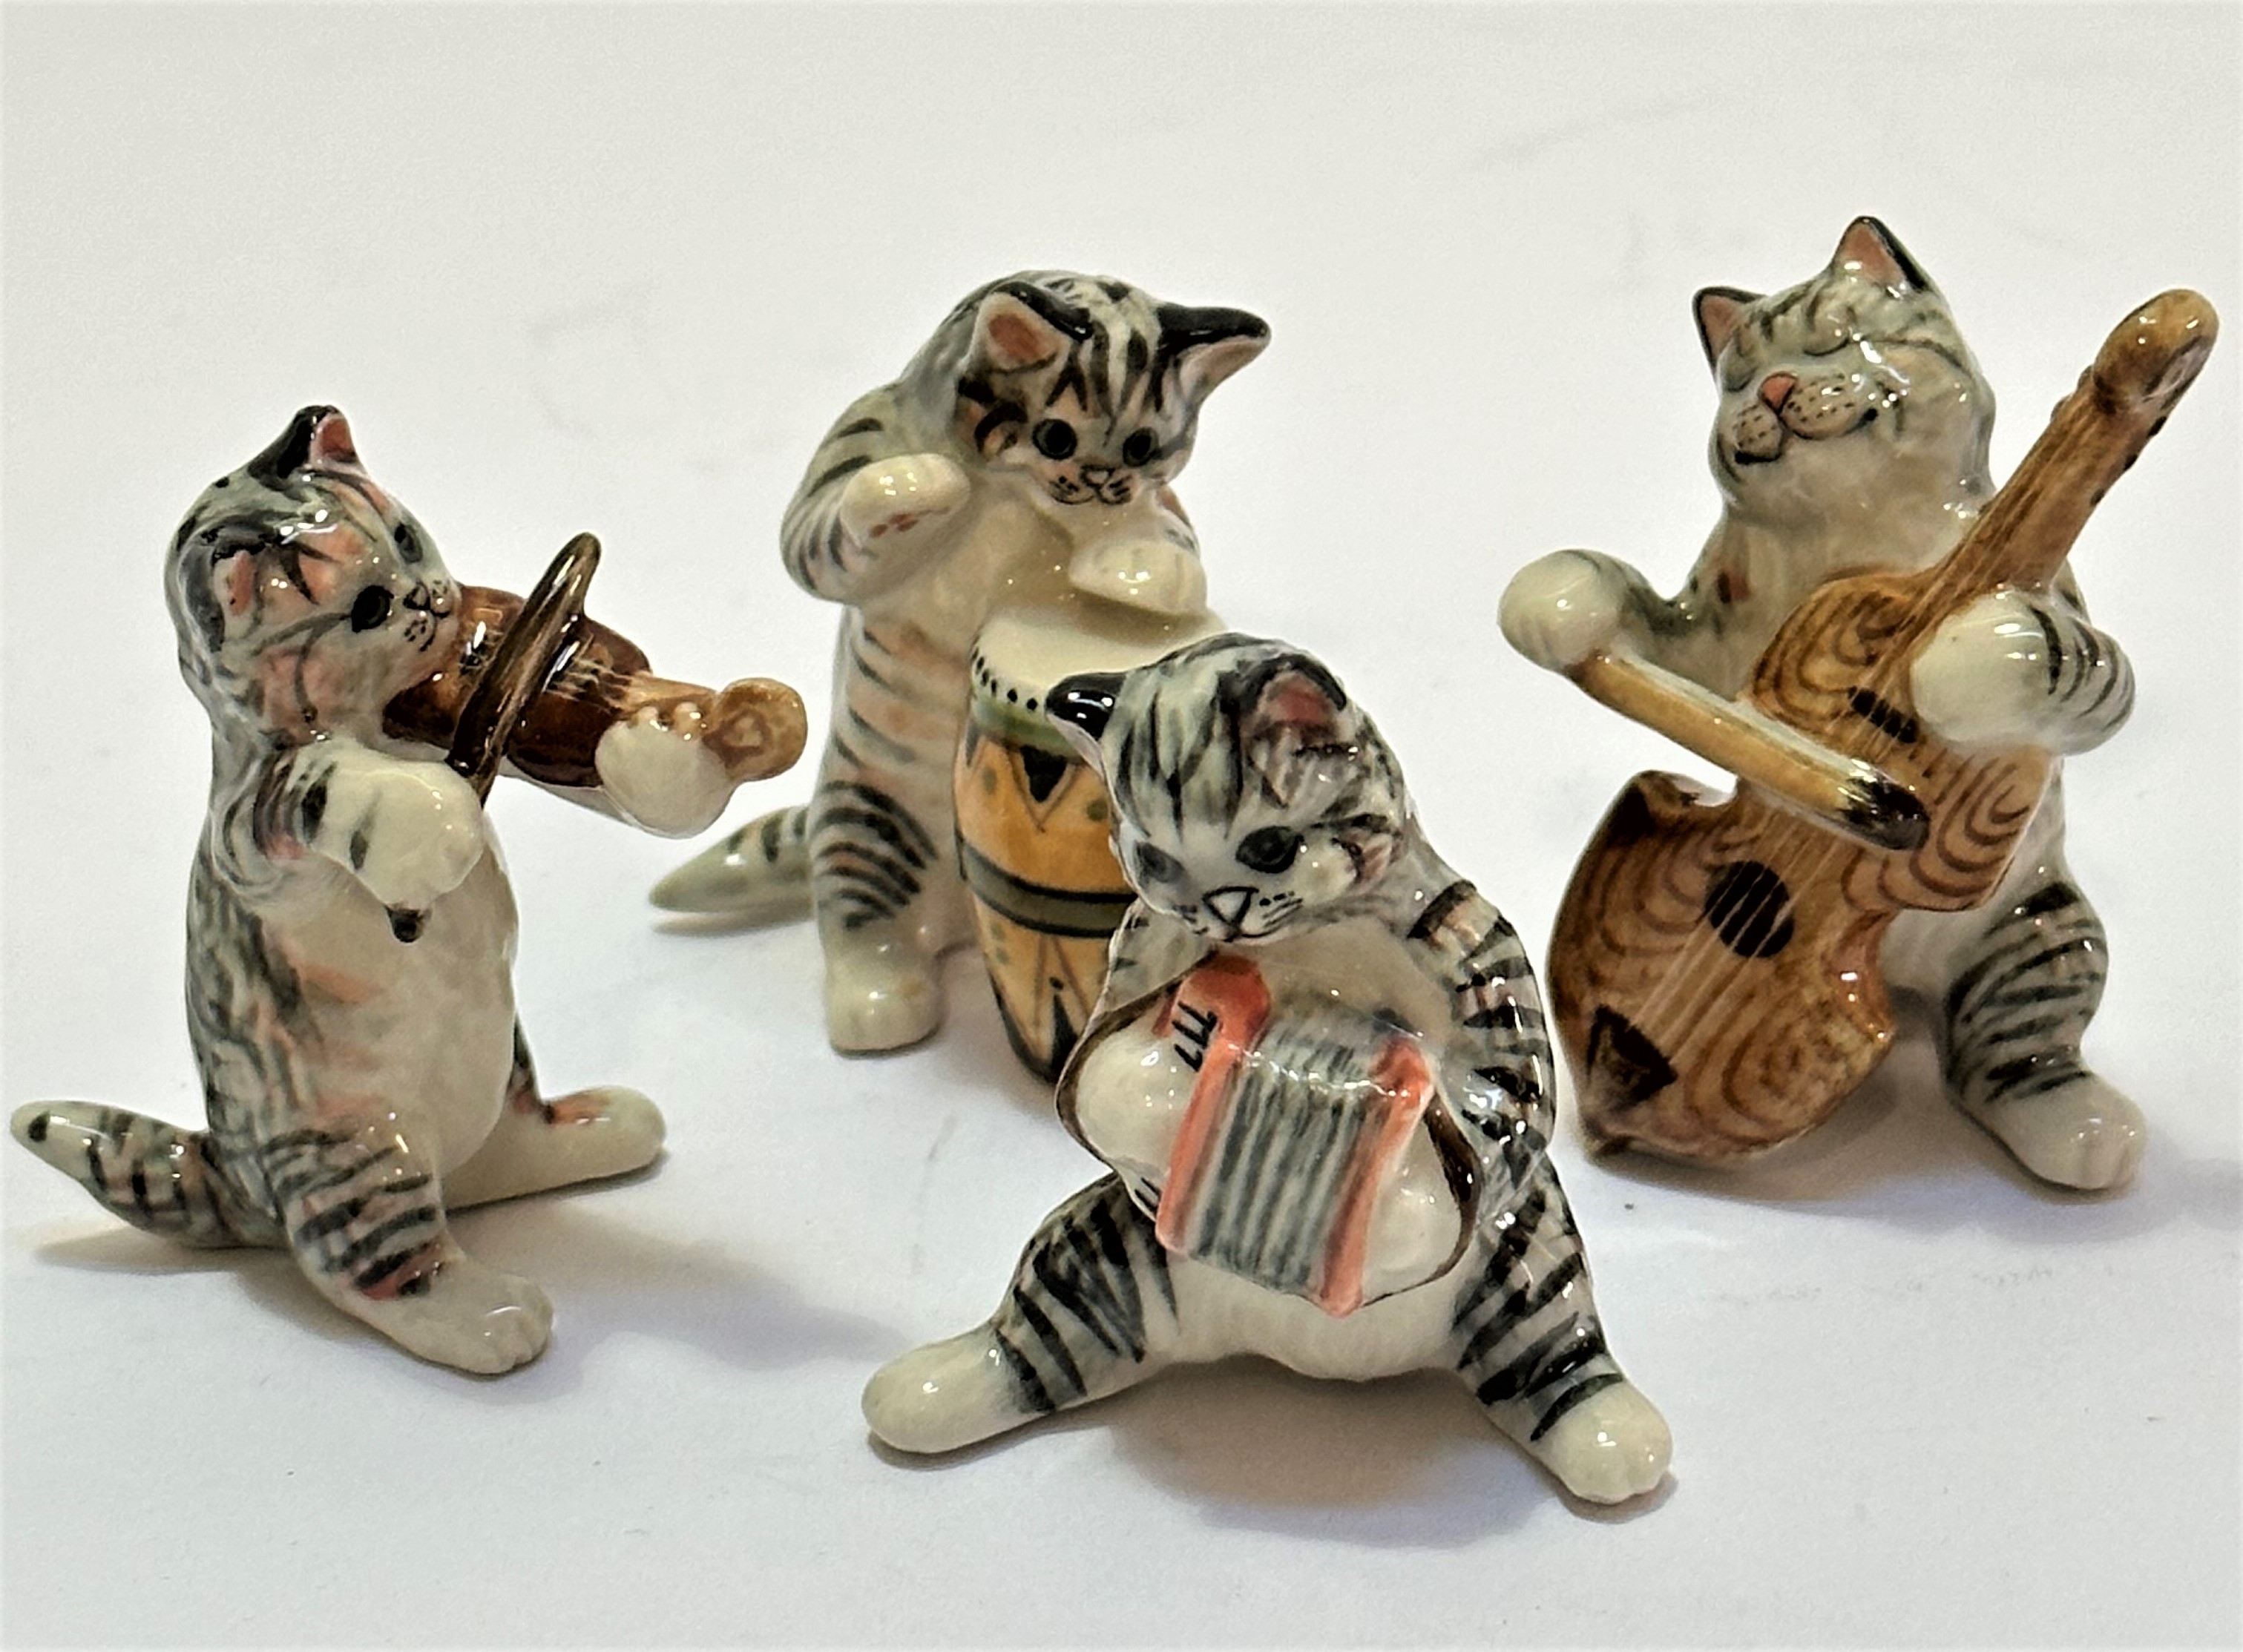 A Kyd ceramic miniature tabby cat band including bass player, according, drum and violin player, (